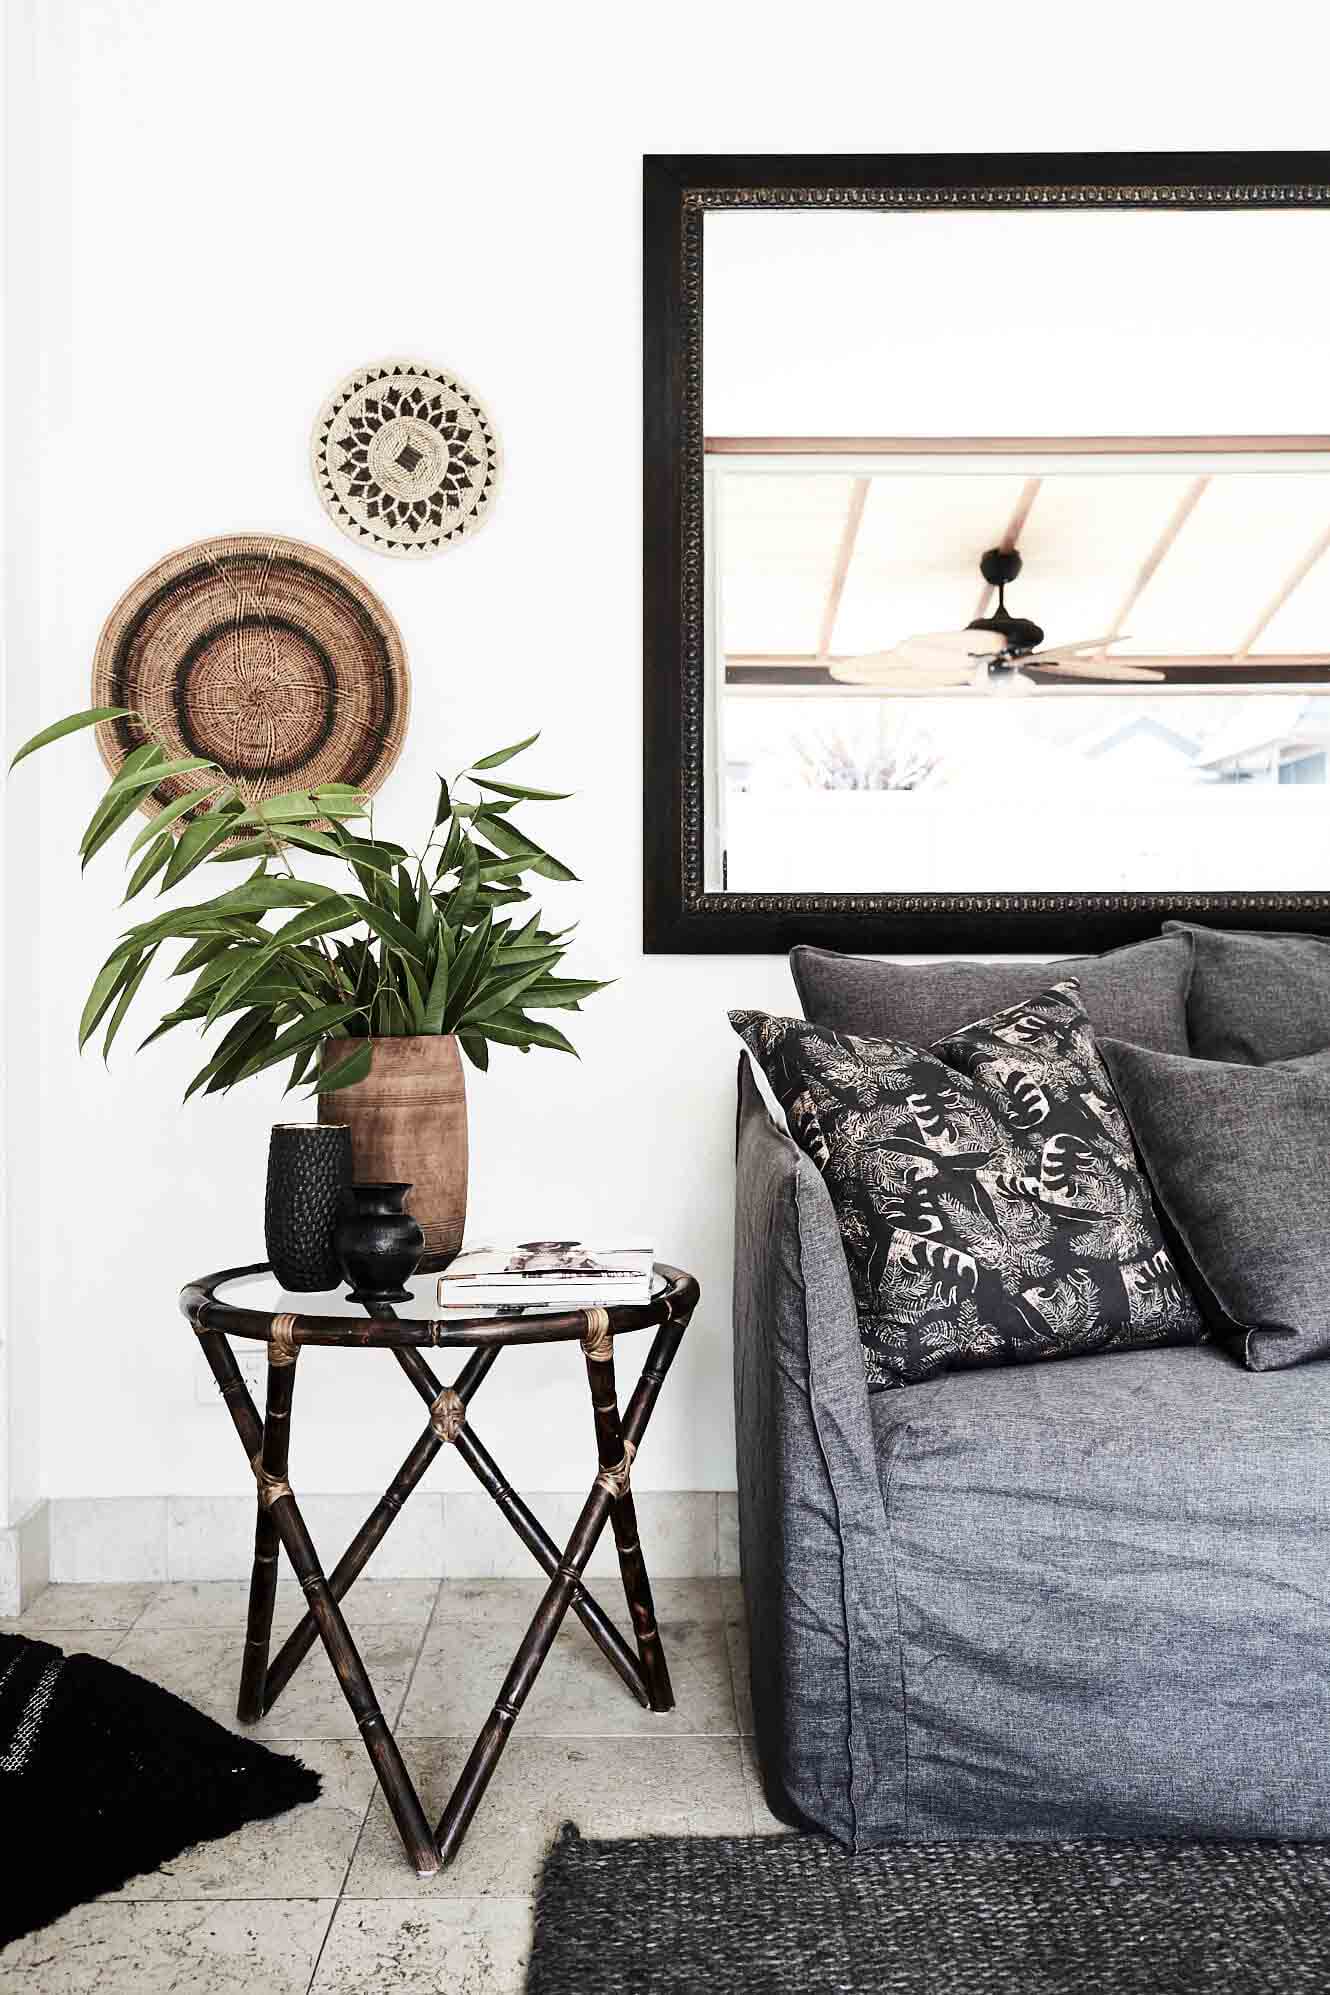 Interior styling at The Villas of Byron with a mix of linen lounge, cane side table, indoor plants, rustic wall hangings and oversize mirrors